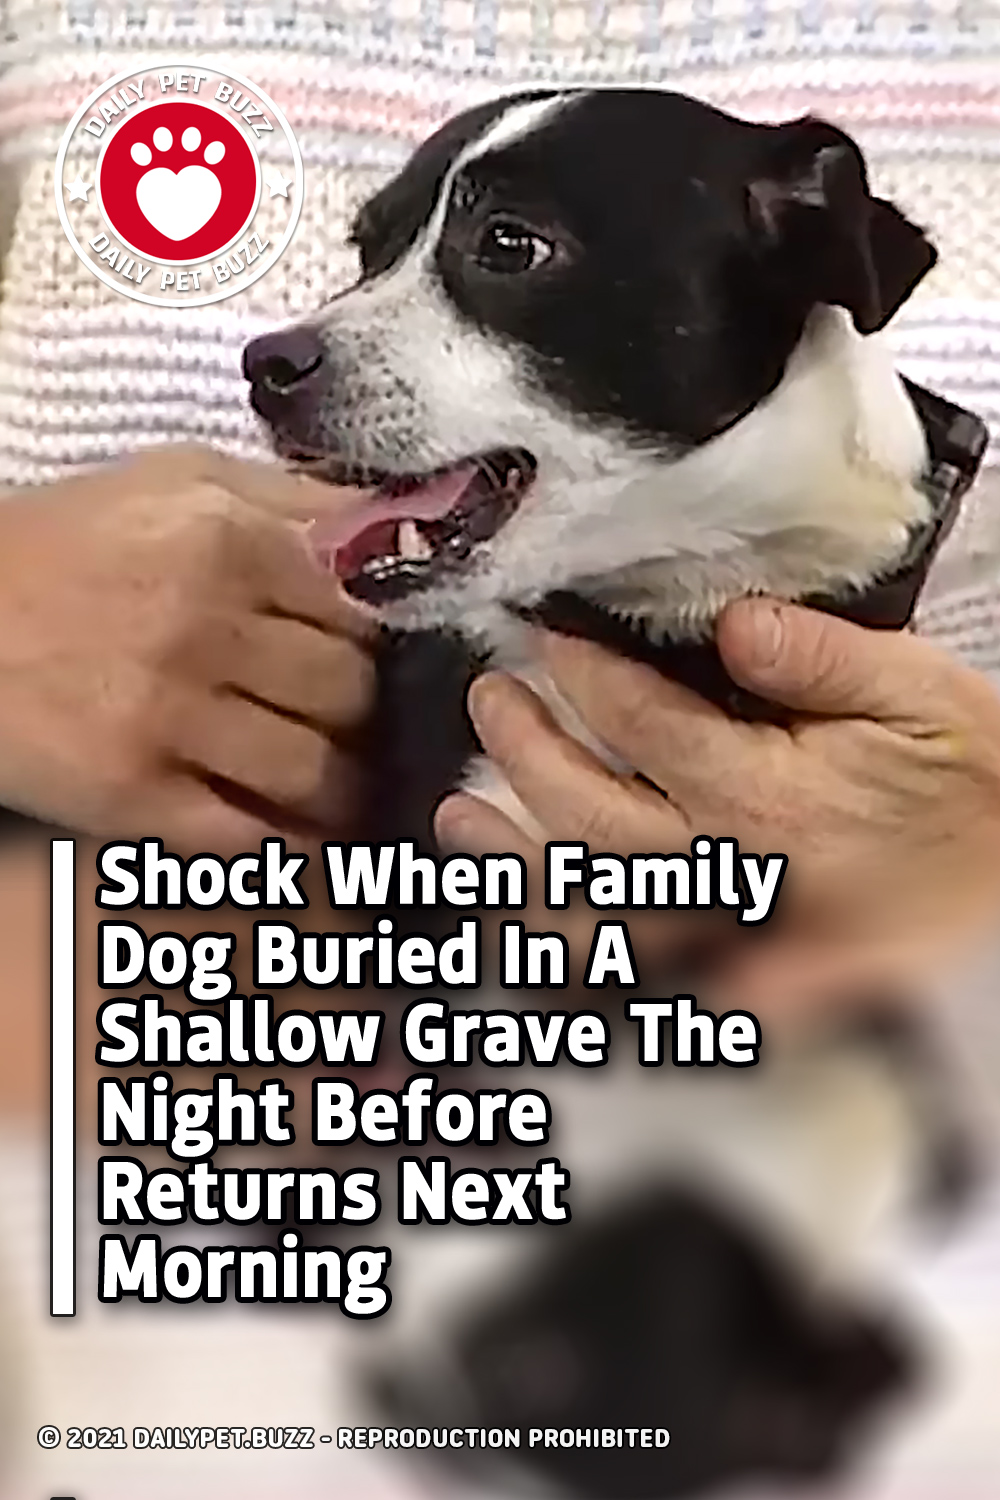 Shock When Family Dog Buried In A Shallow Grave The Night Before Returns Next Morning